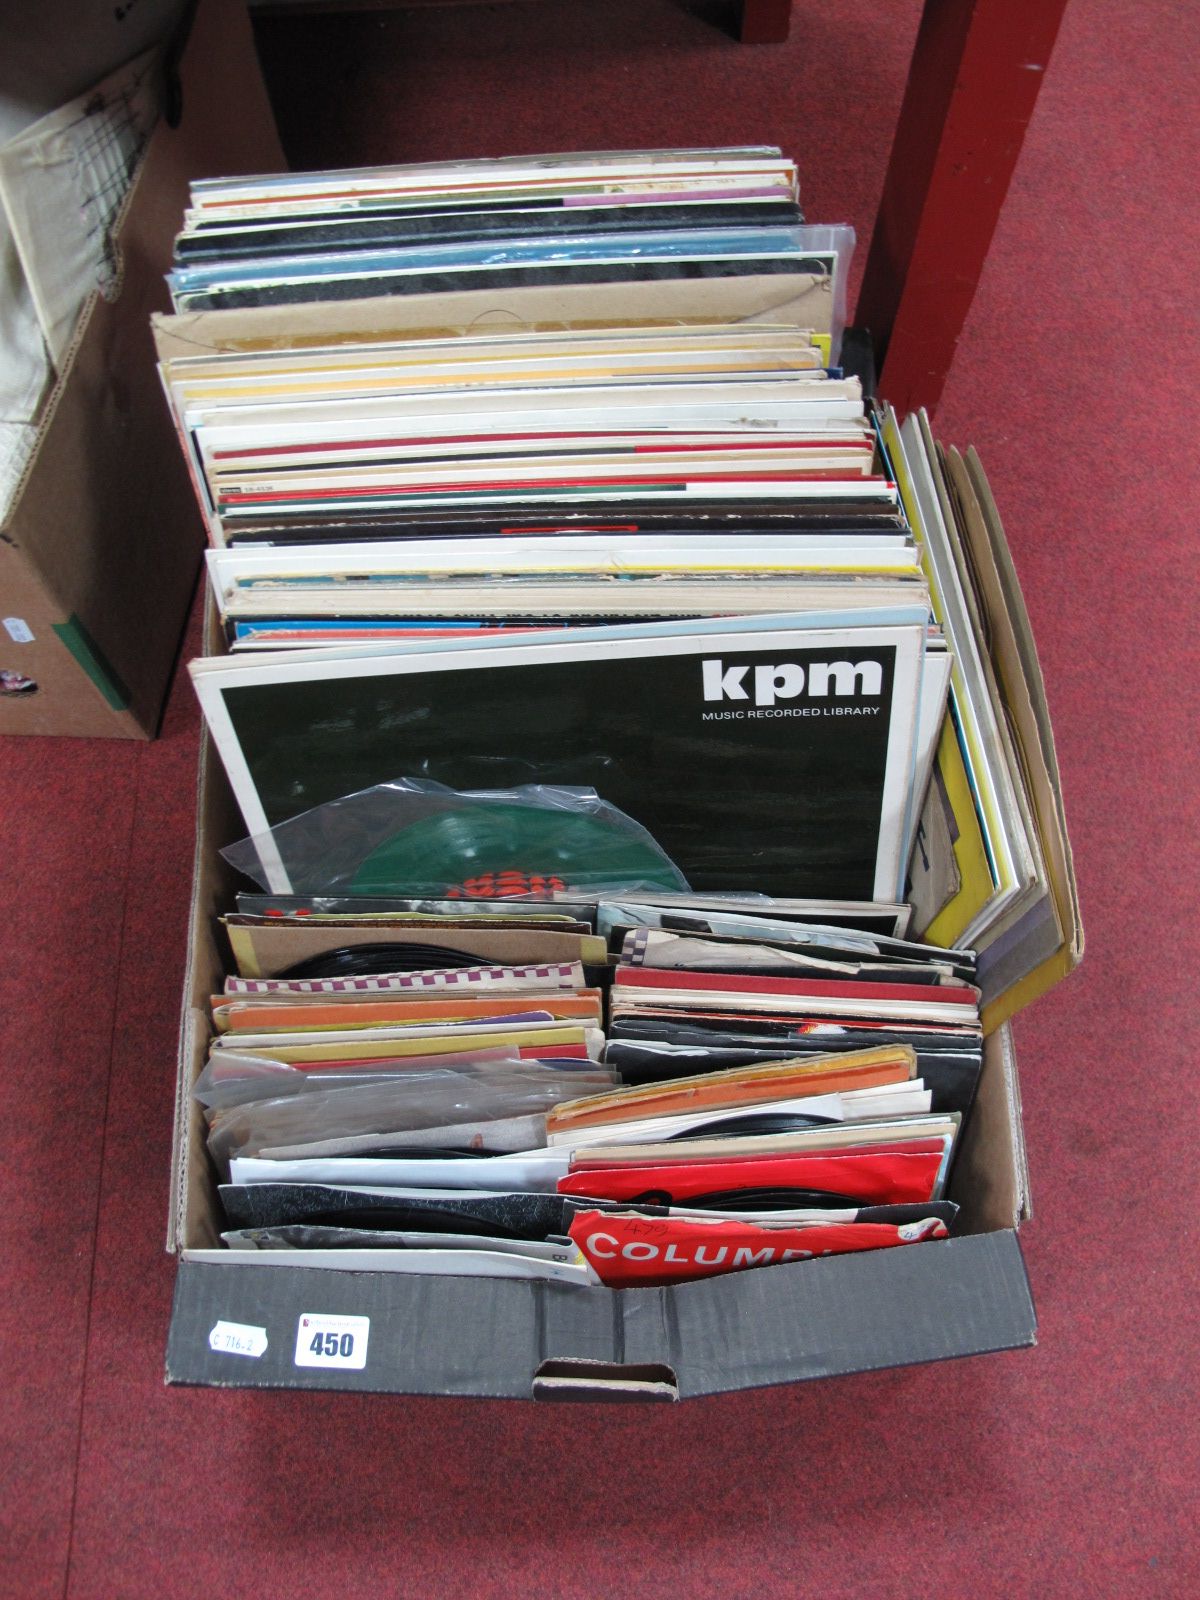 Rock and Classical LP's, including KPM Music Library, Steve Hackett, Bob Dylan, Jeff Beck, Buddy